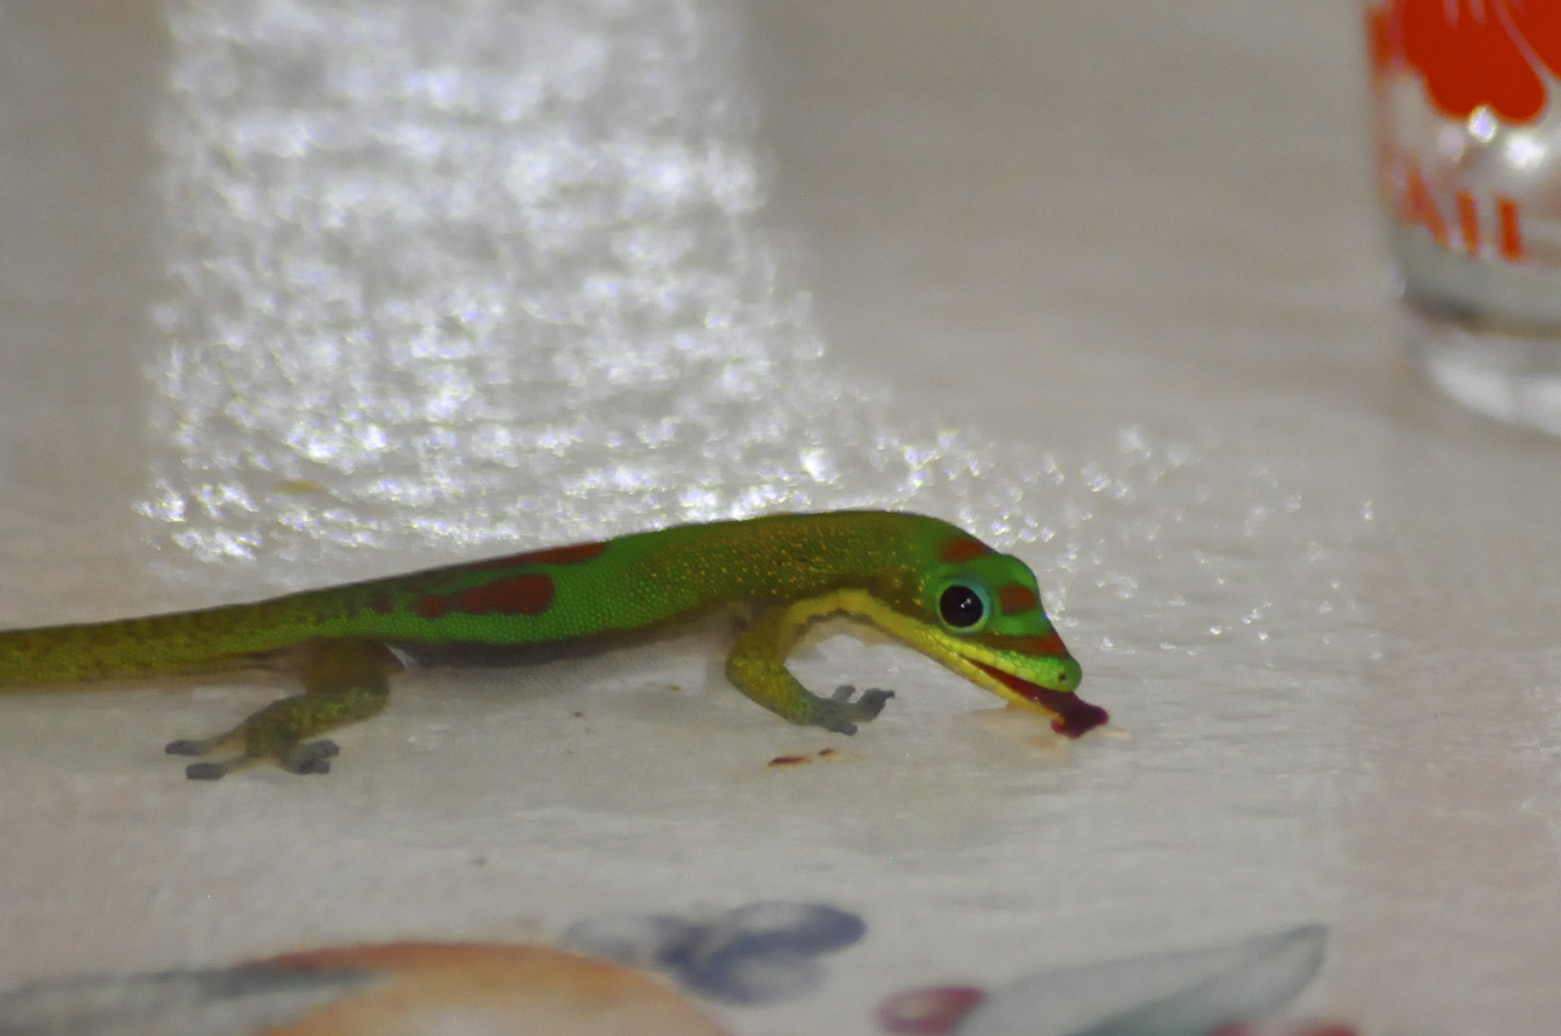 a green and orange lizard on a table